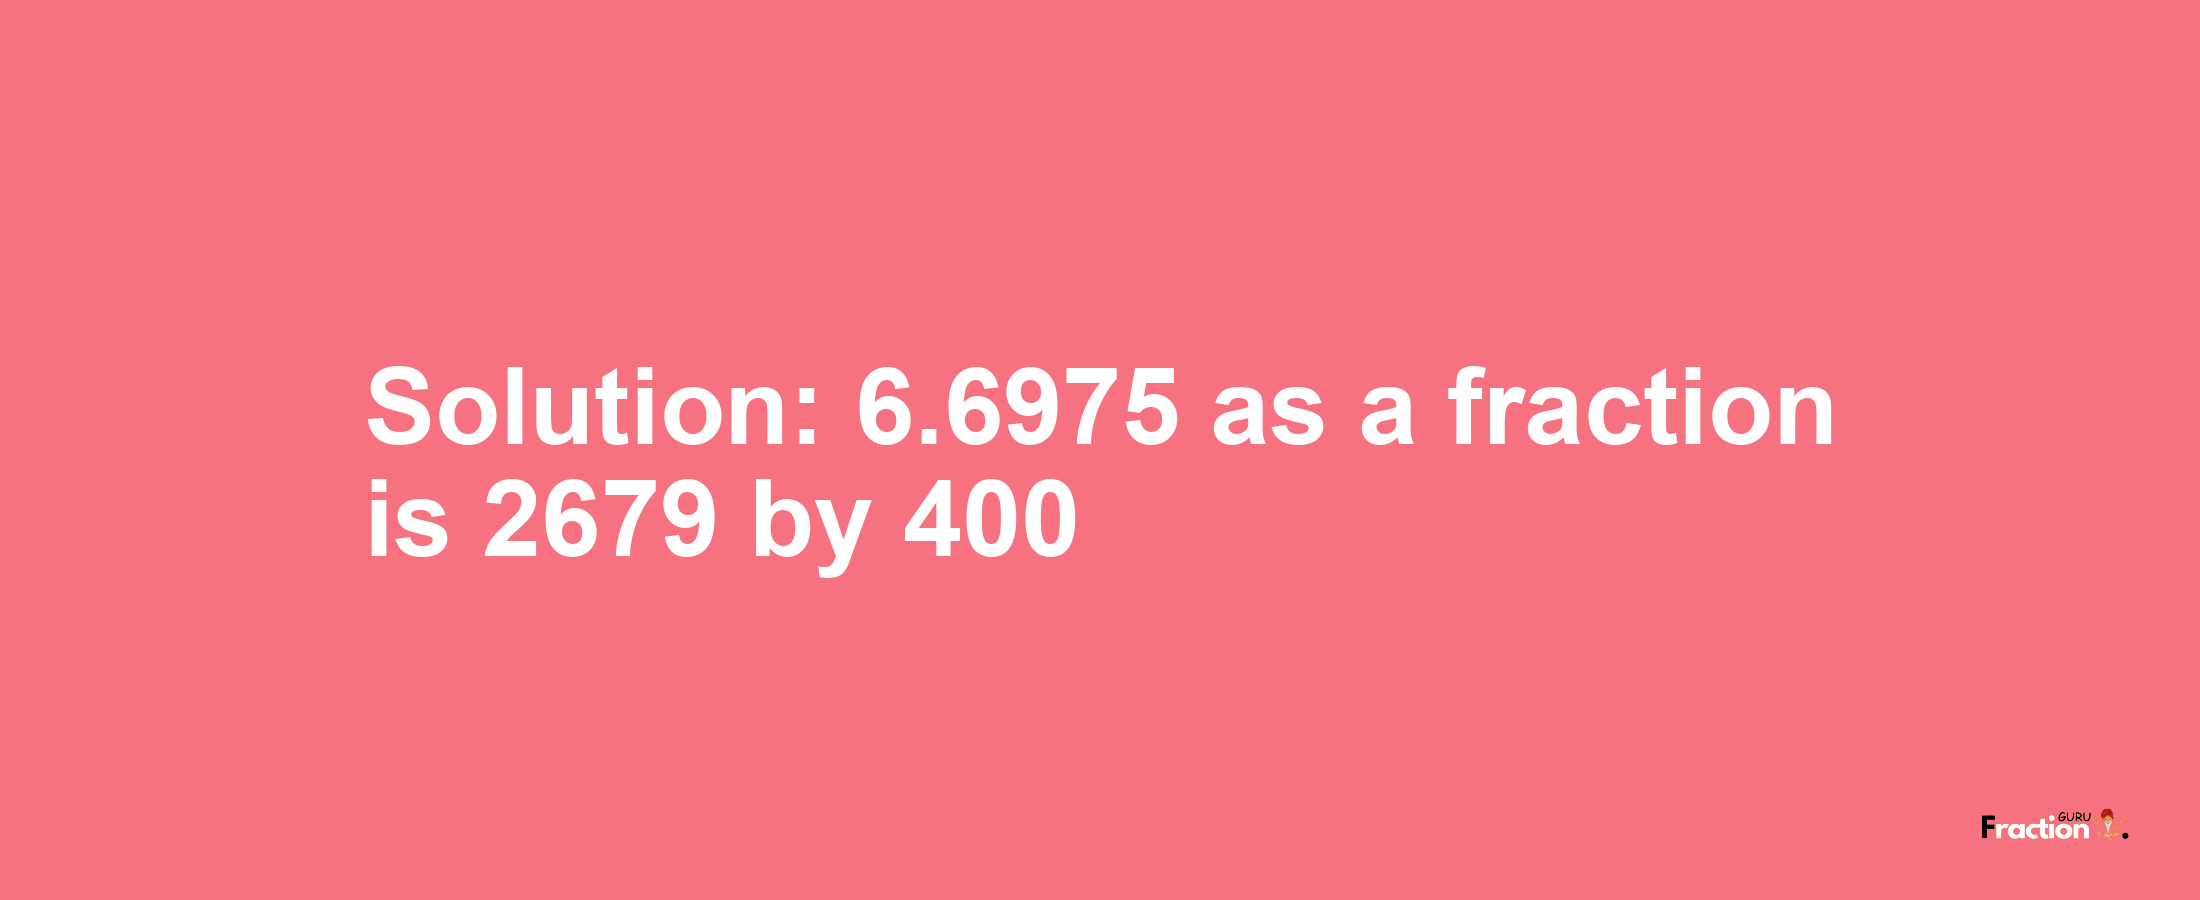 Solution:6.6975 as a fraction is 2679/400